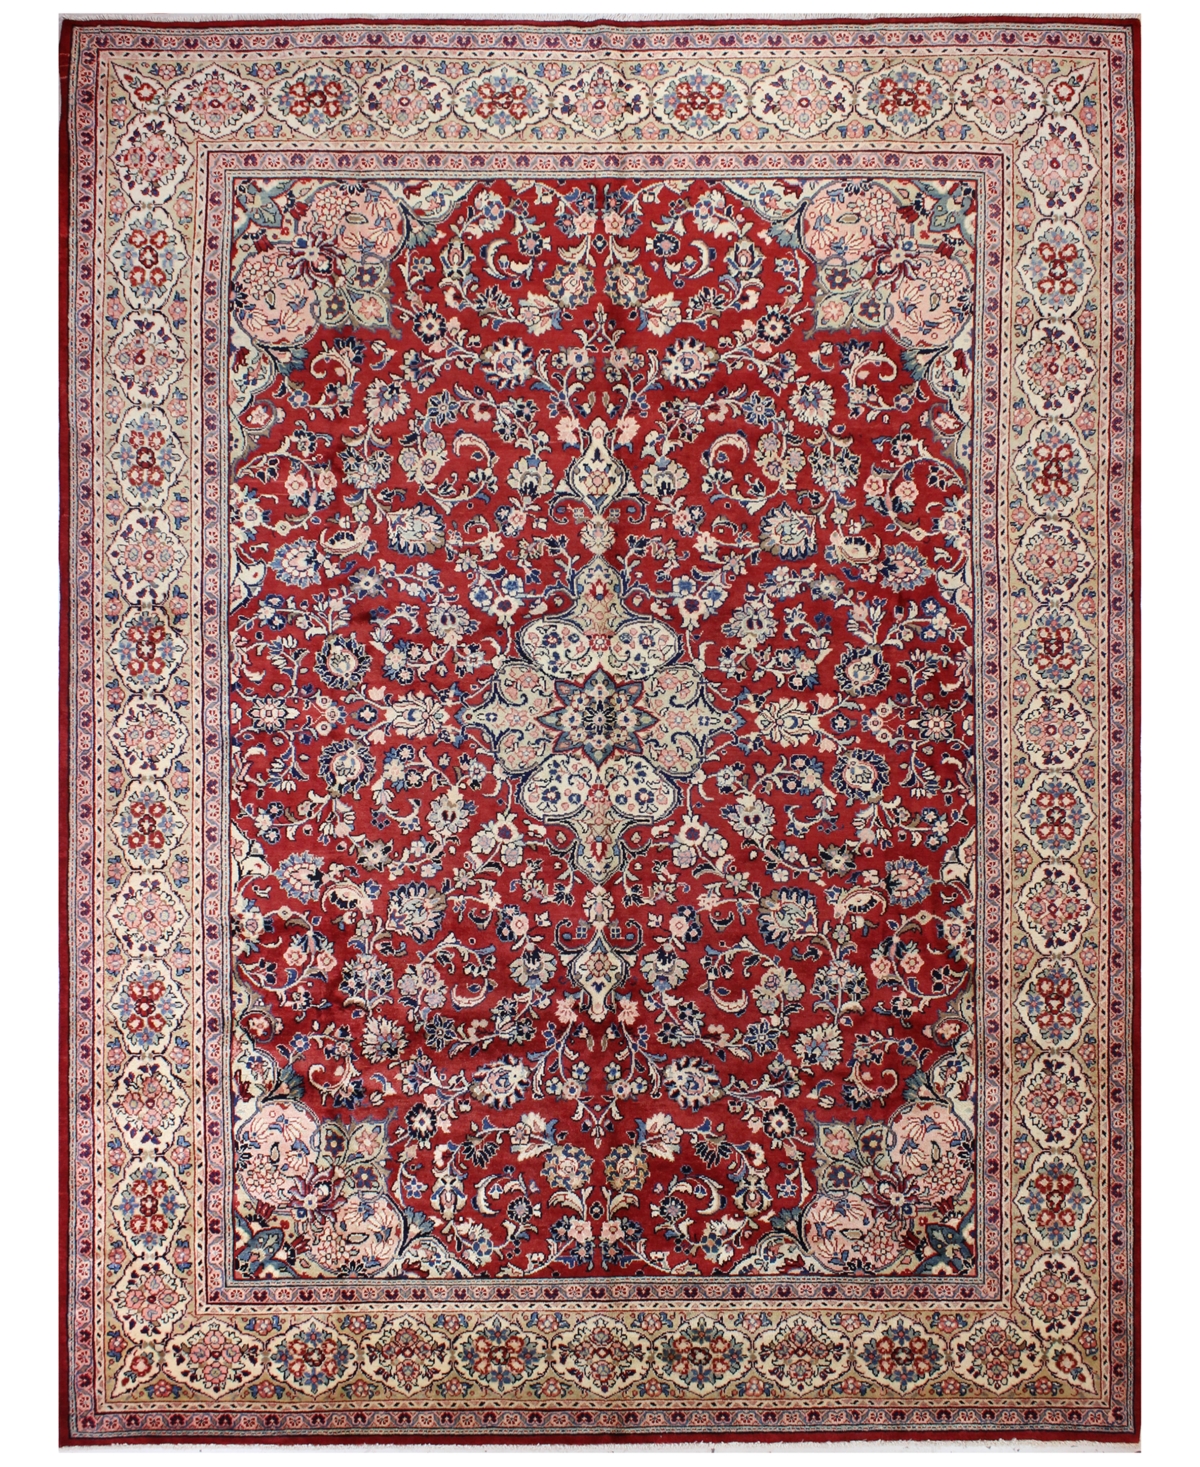 Bb Rugs Sarouk 625428 Red 9'6in x 12'10in Area Rug - Red